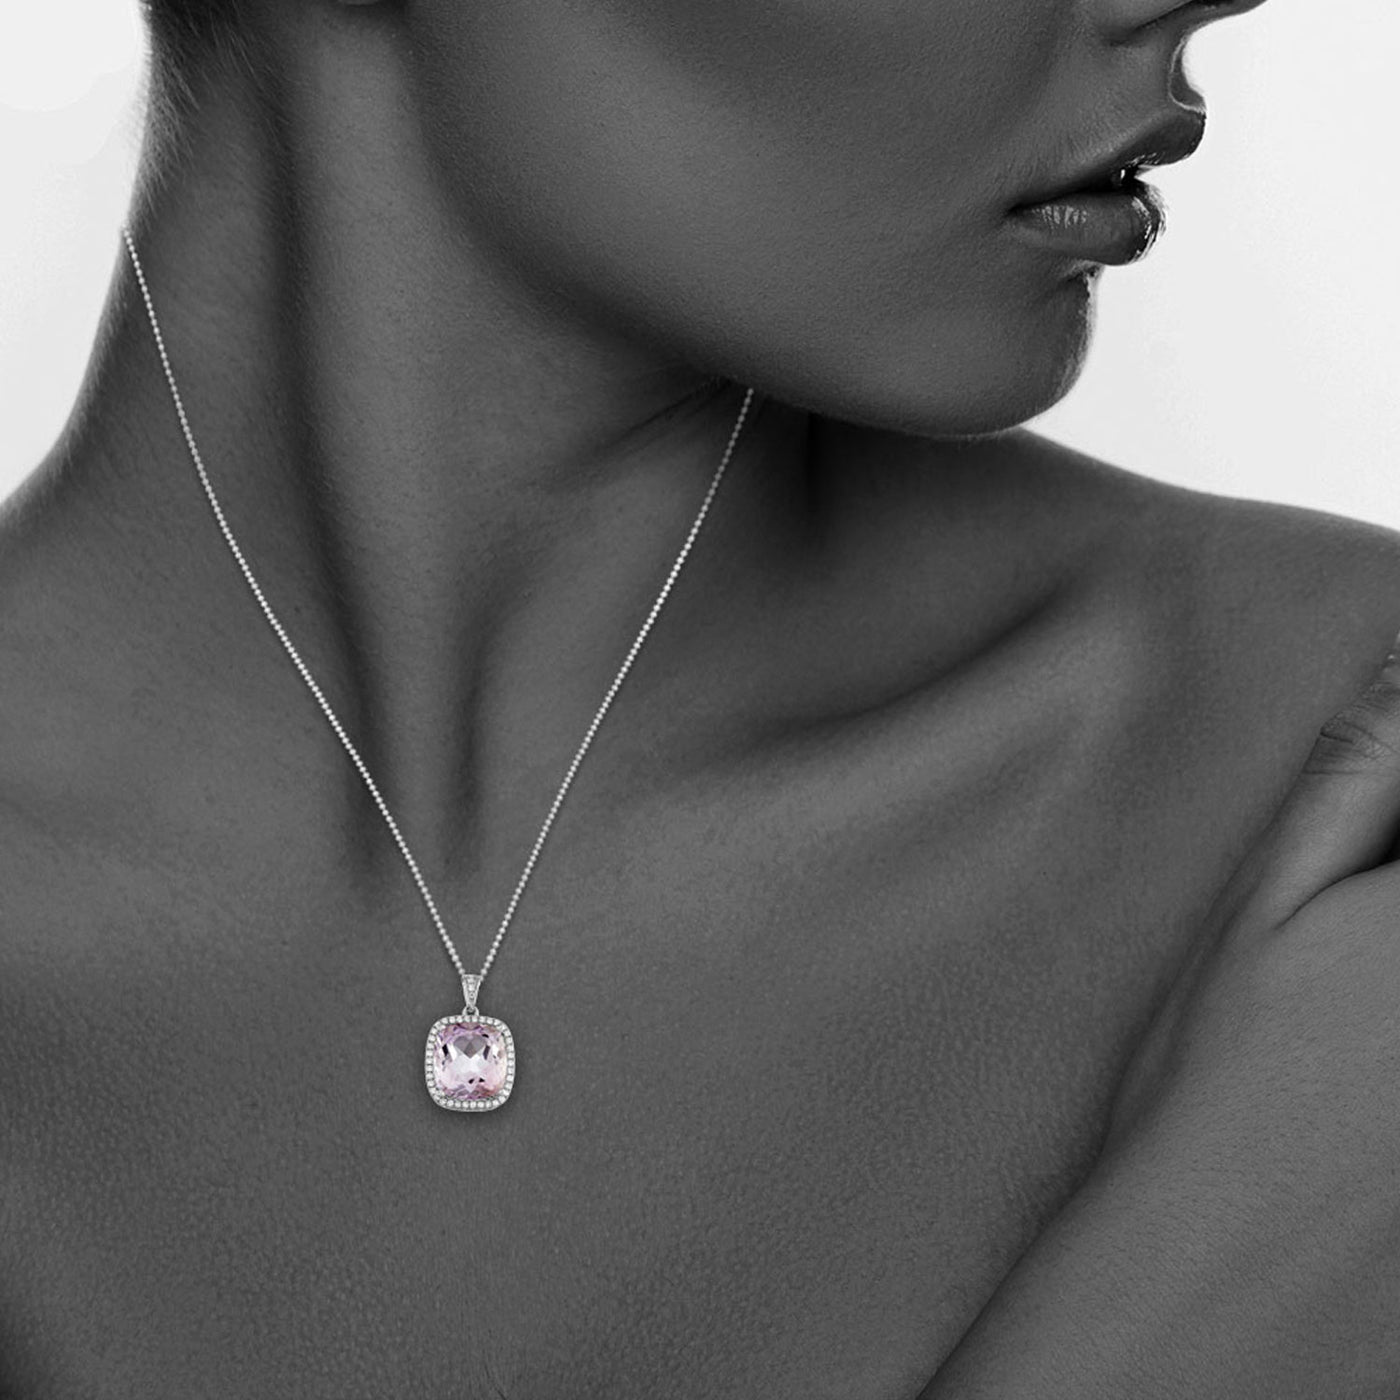 Platinum Plated Sterling Silver Large Cushion Cut Amethyst Pave Cz Pendant Necklace